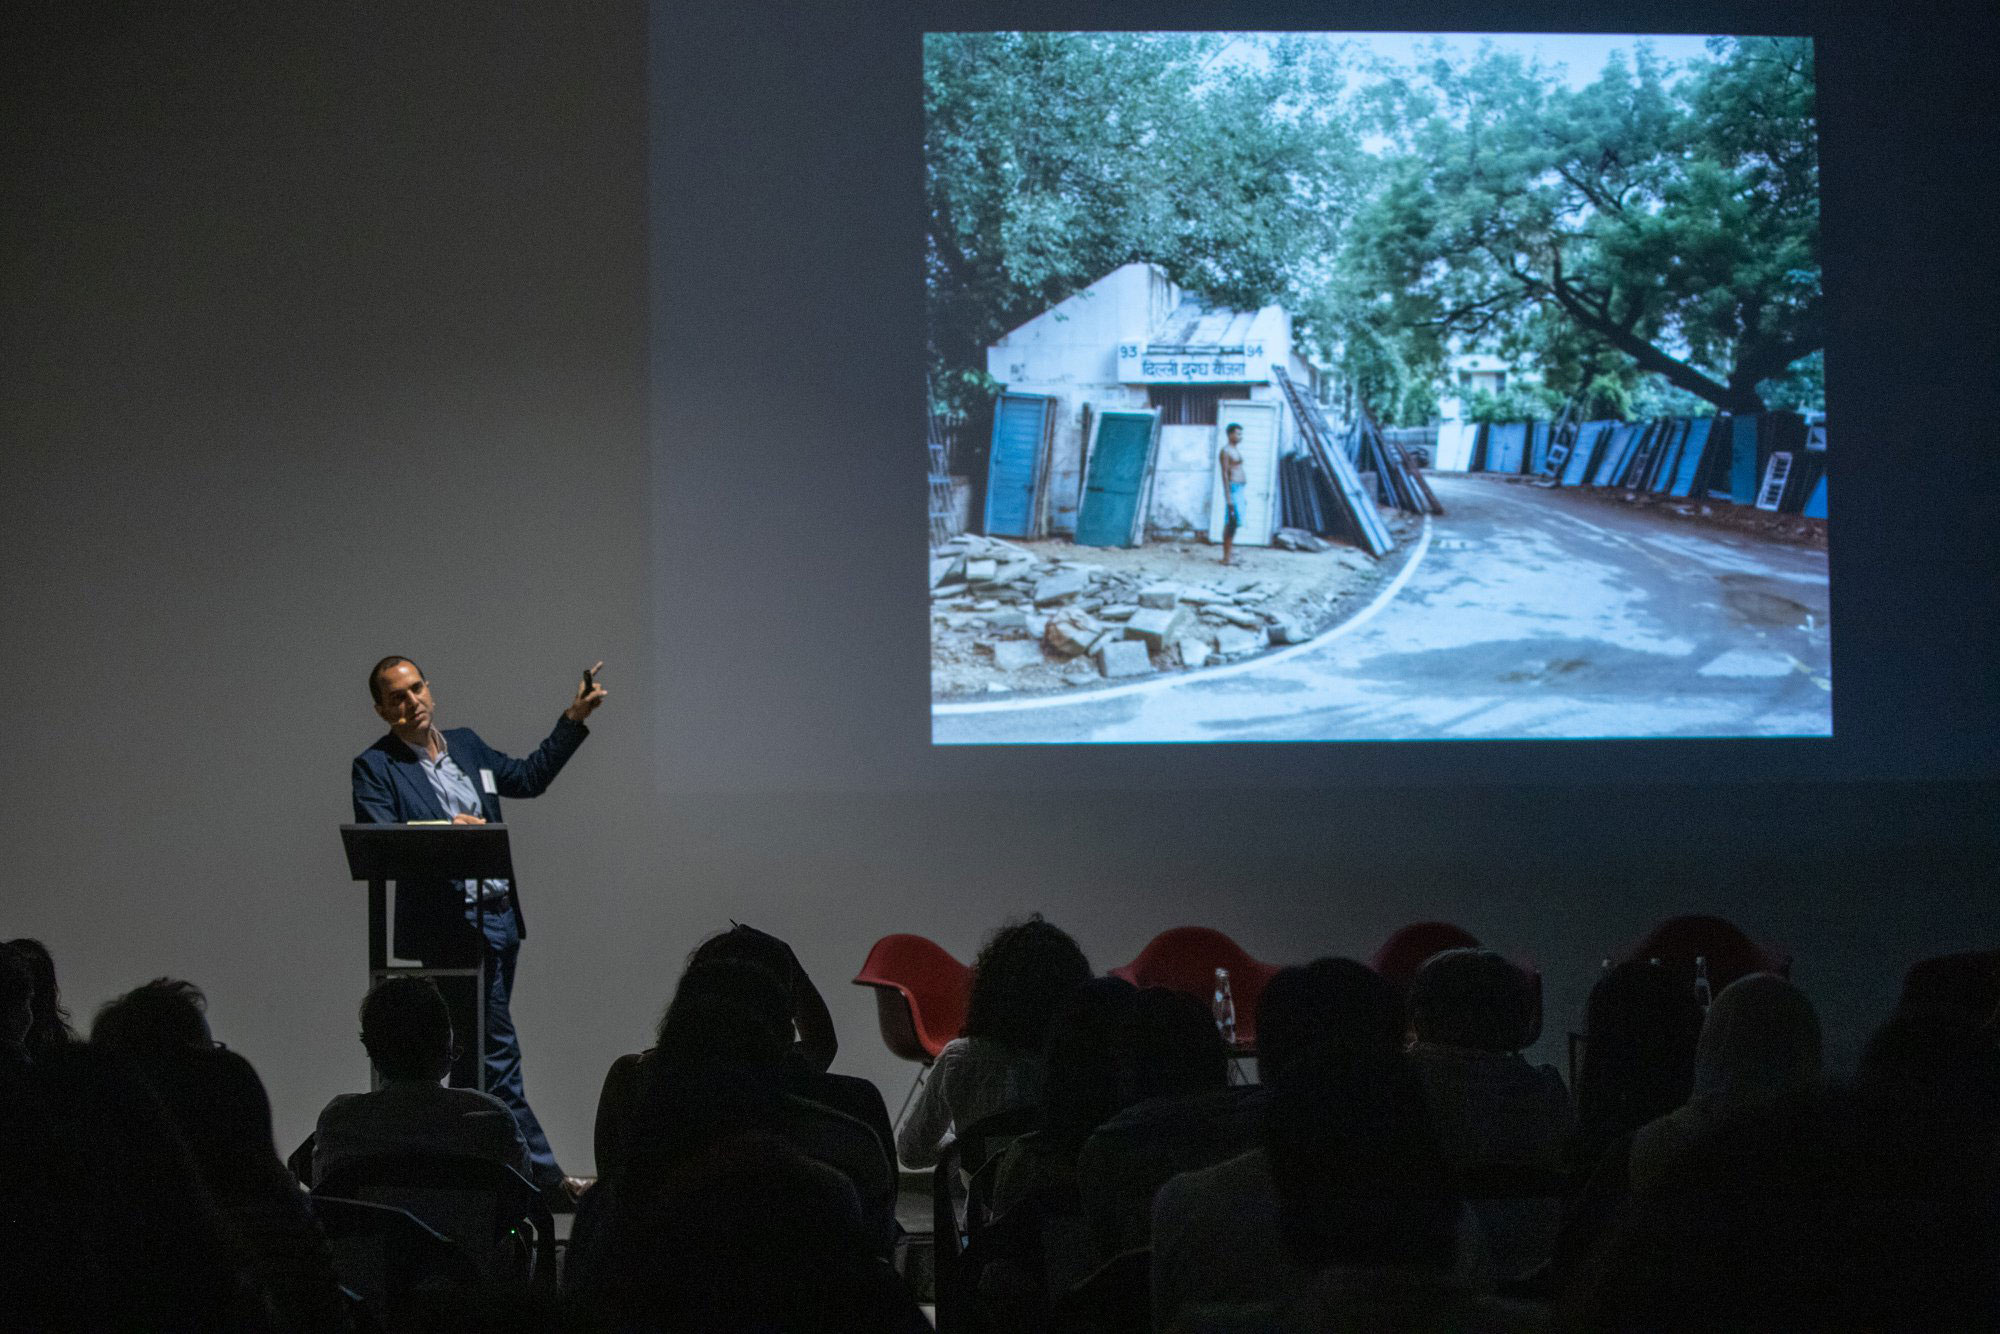 Randhir Singh presenting Modernity, Architecture and the Role of the Photographer, at Temporary Spaces, Alserkal Arts Foundation Project Space, Dubai.